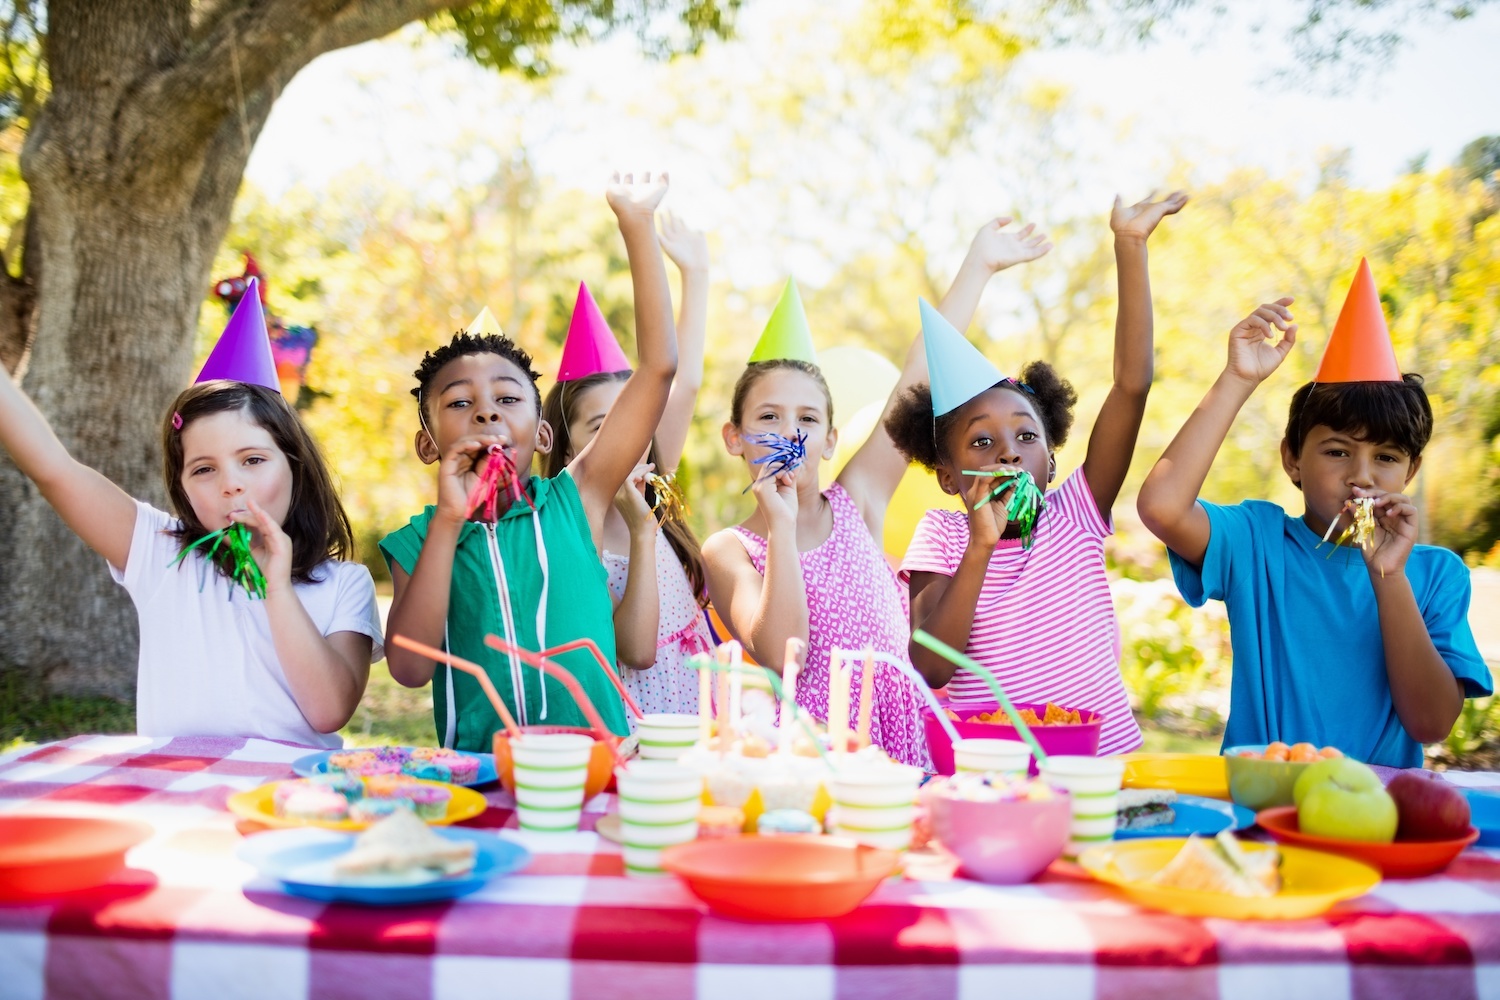 7-year-old gets a special birthday surprise from her neighbors